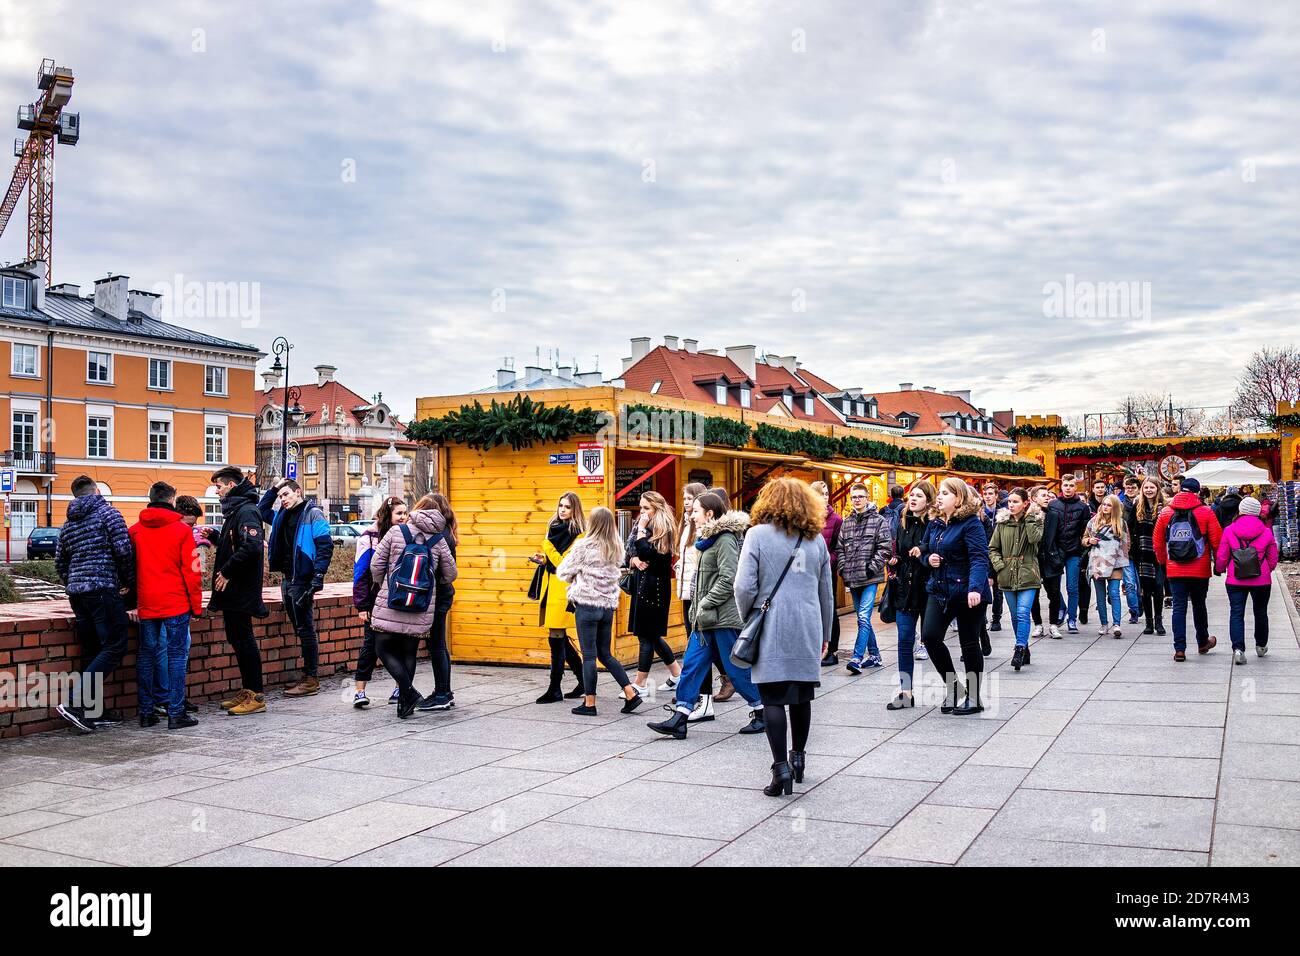 Warsaw, Poland - December 18, 2019: Old town Warszawa with Christmas market near royal castle square and school field trip group of students walking b Stock Photo